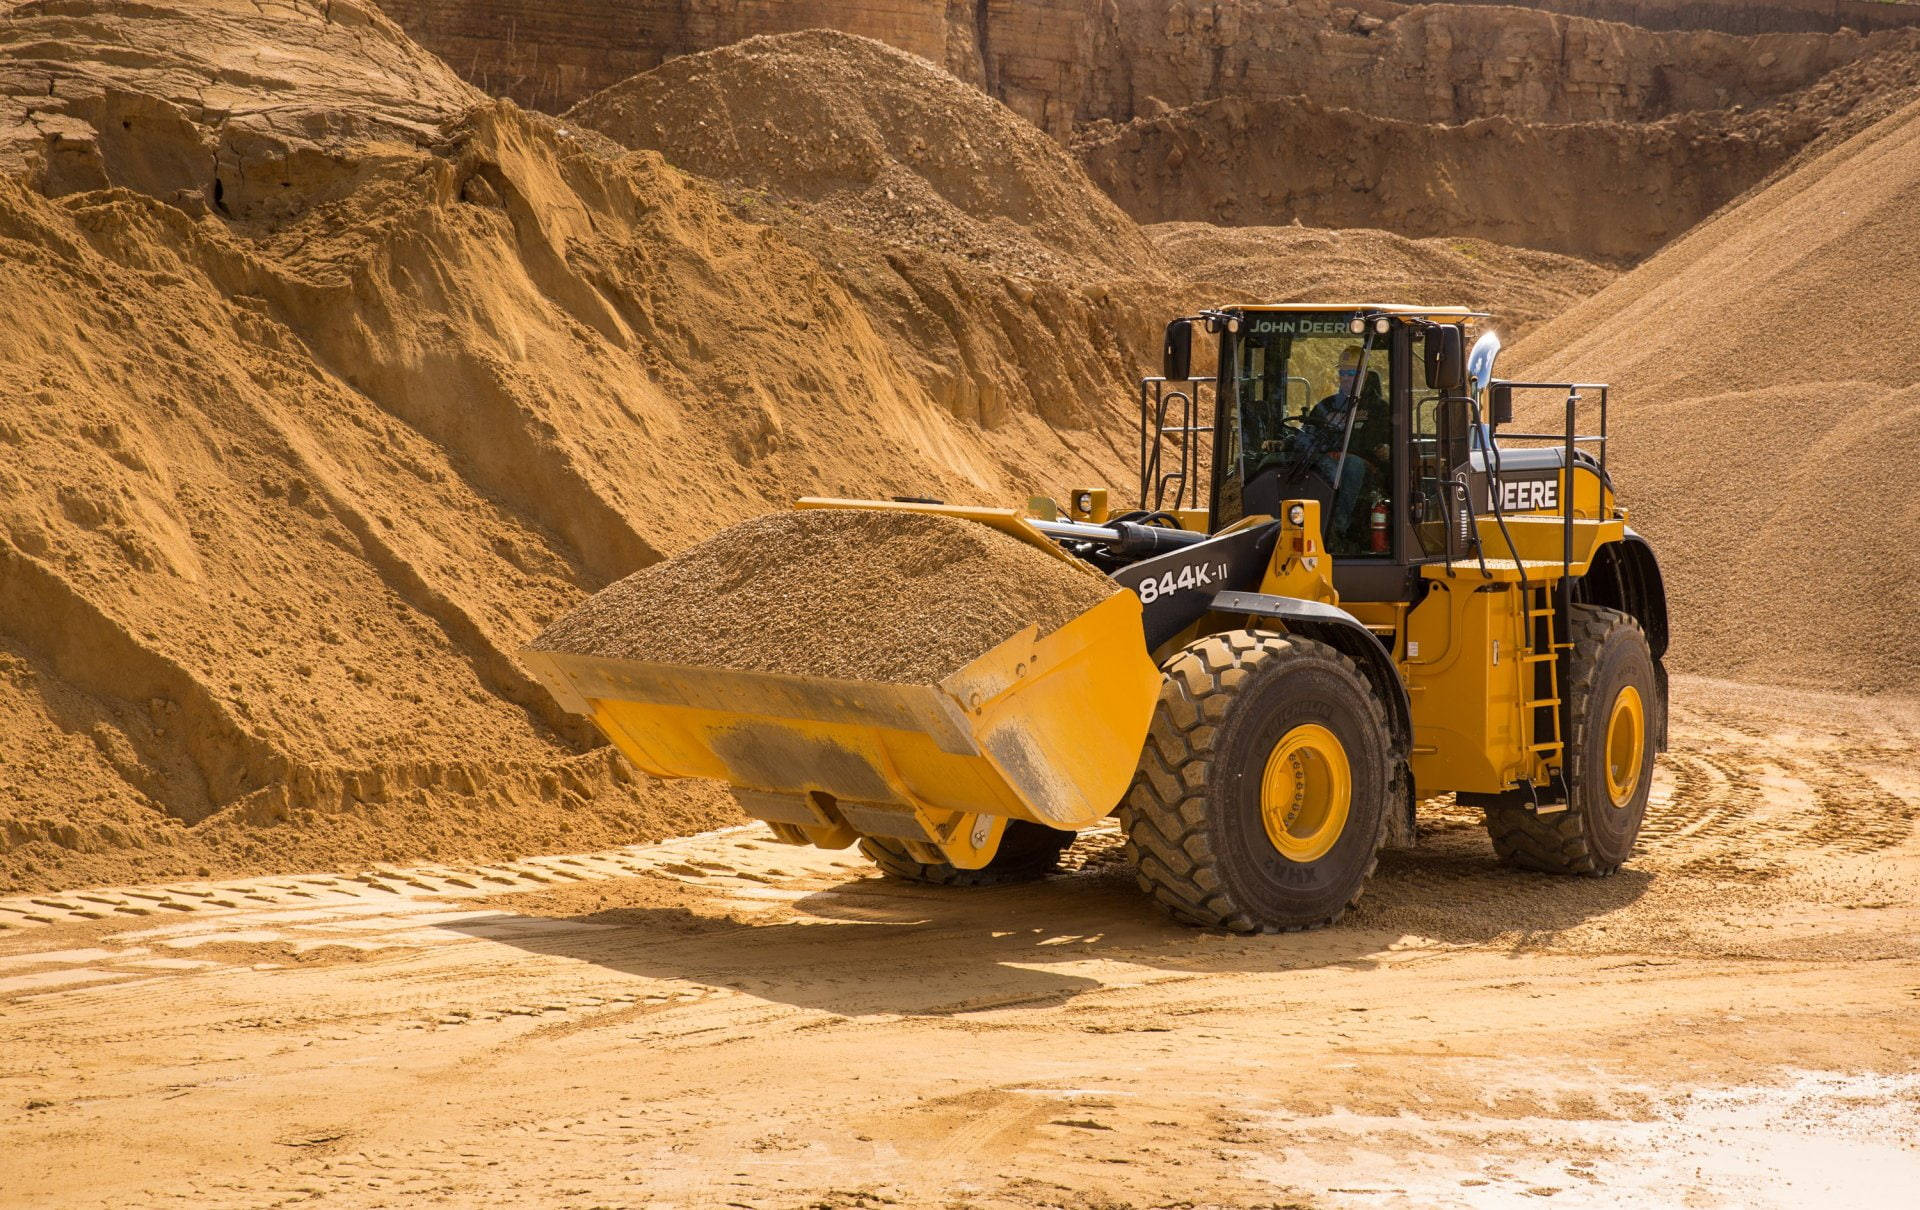 A Powerful John Deere Wheel Loader In Action At The Construction Site. Background